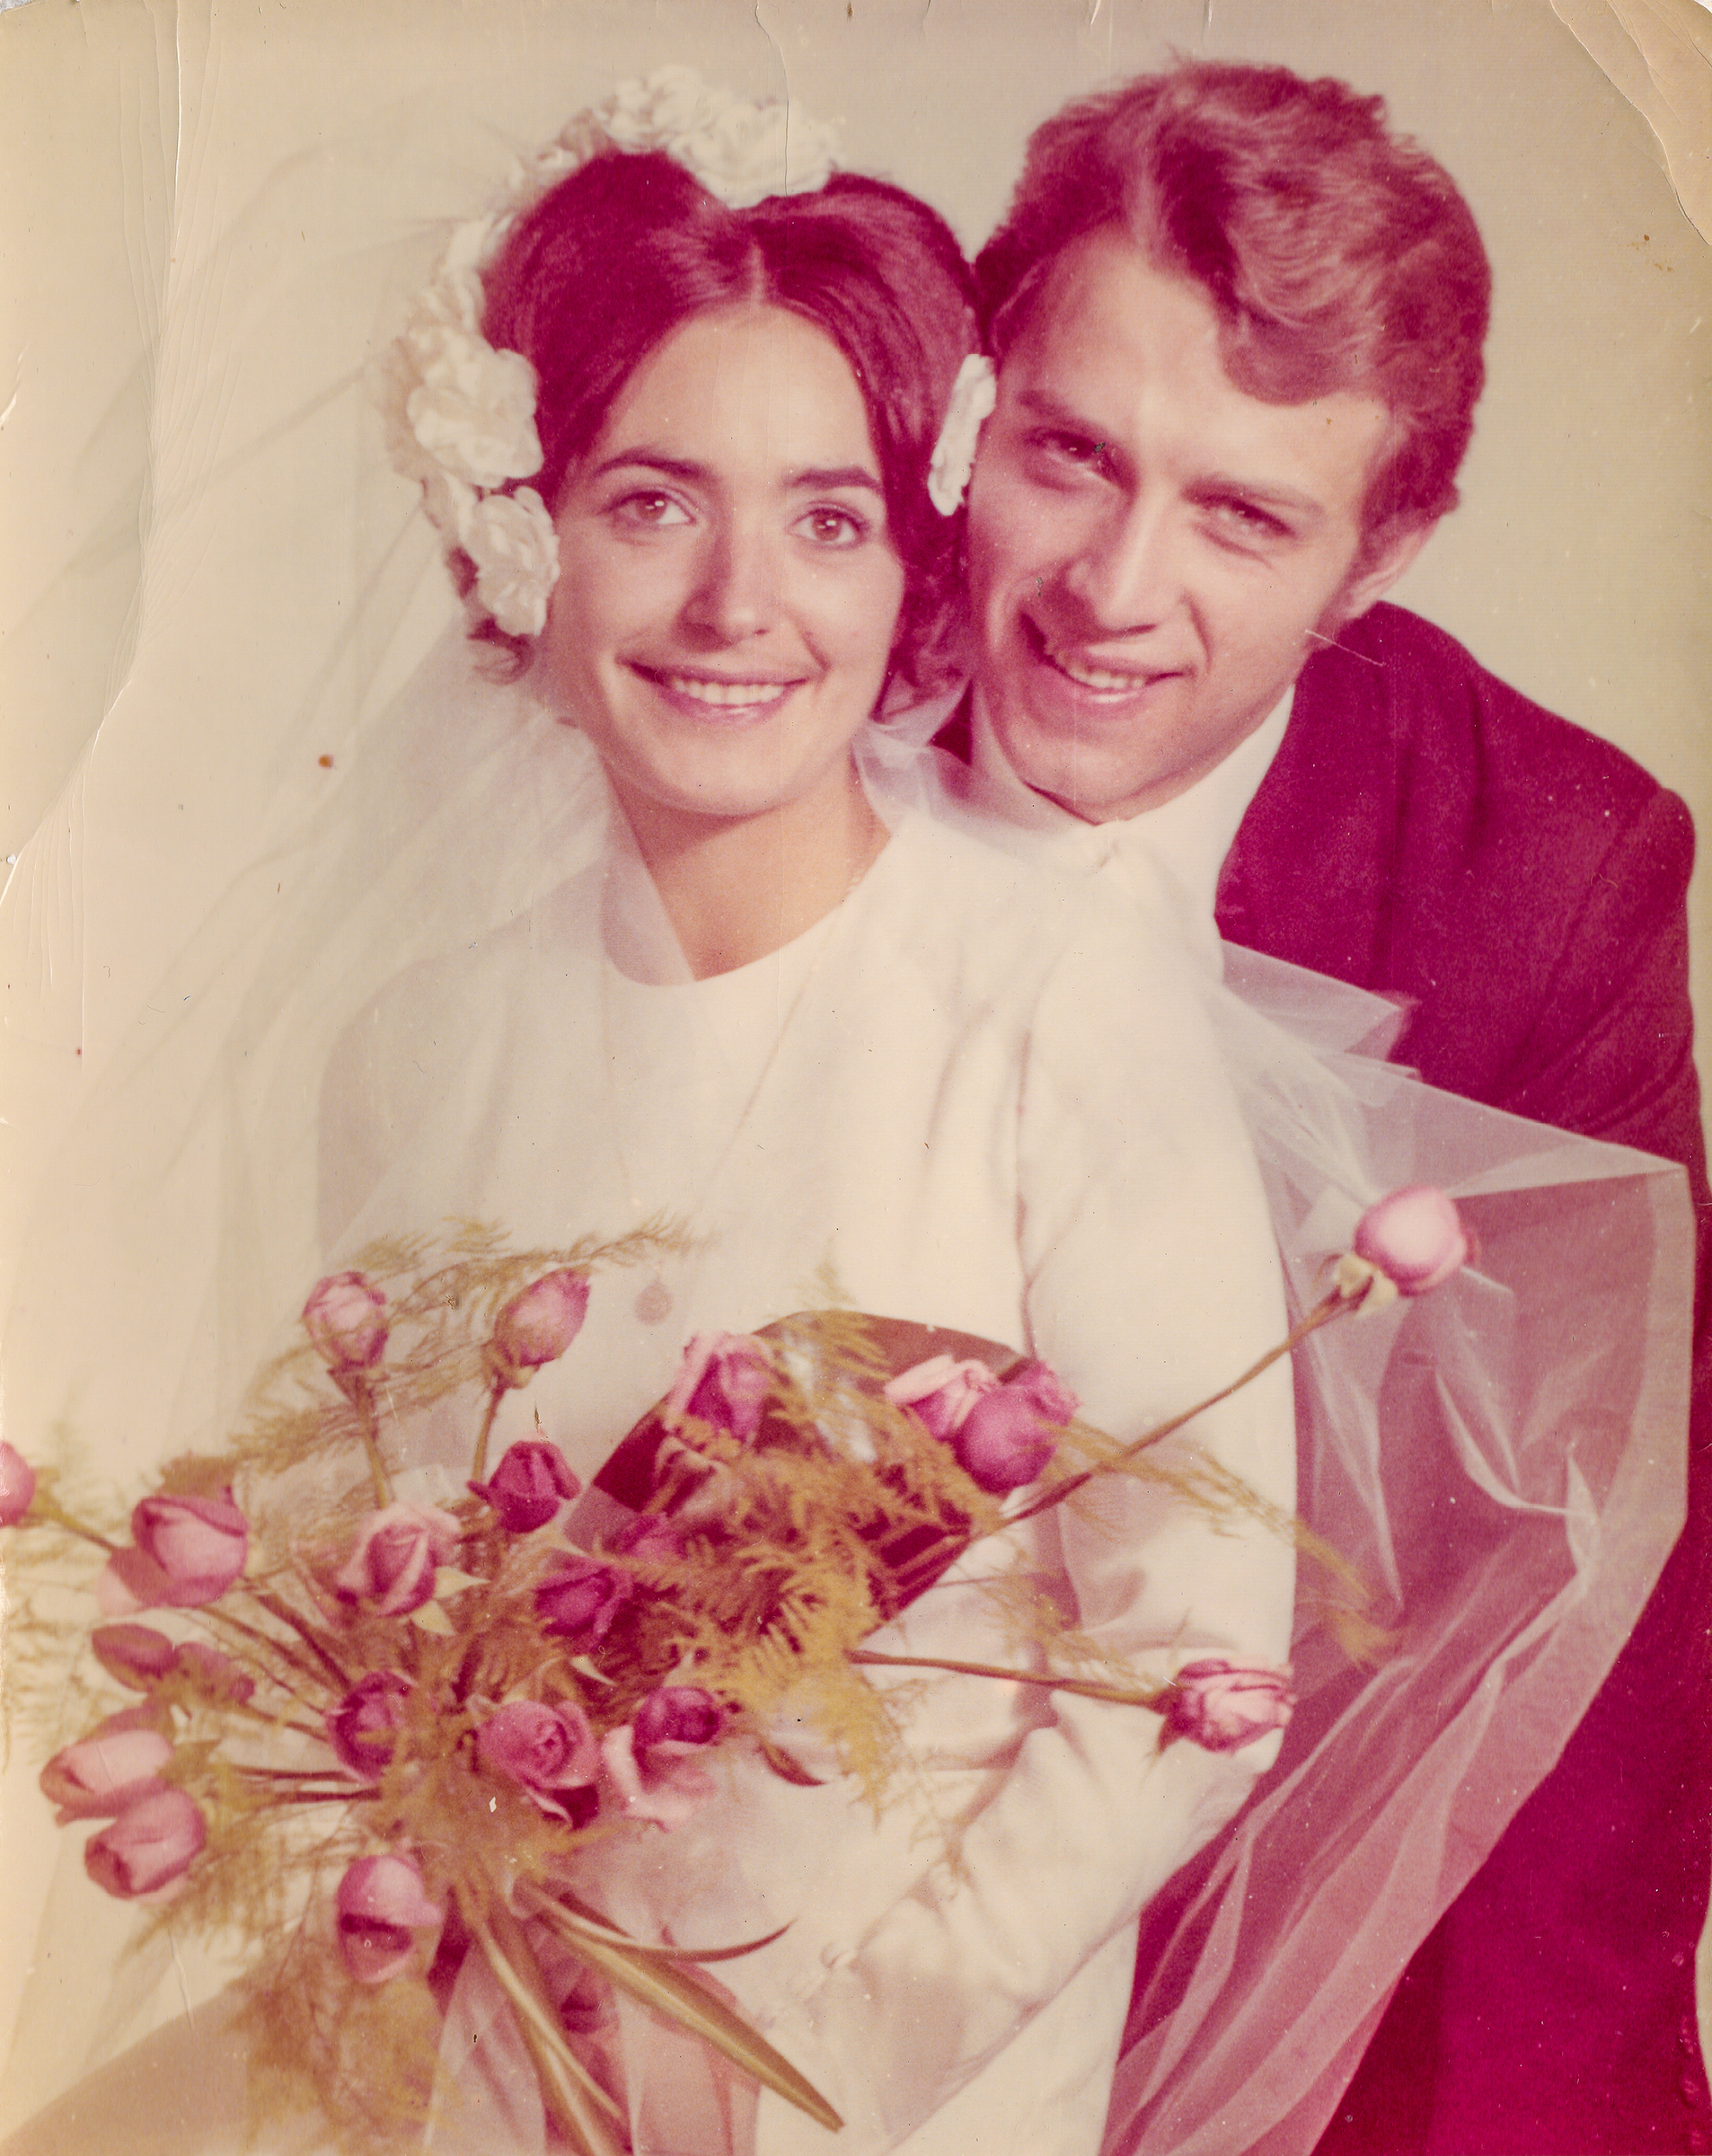 A vintage photo of a newlywed couple, circa 1970 | Source: Shutterstock